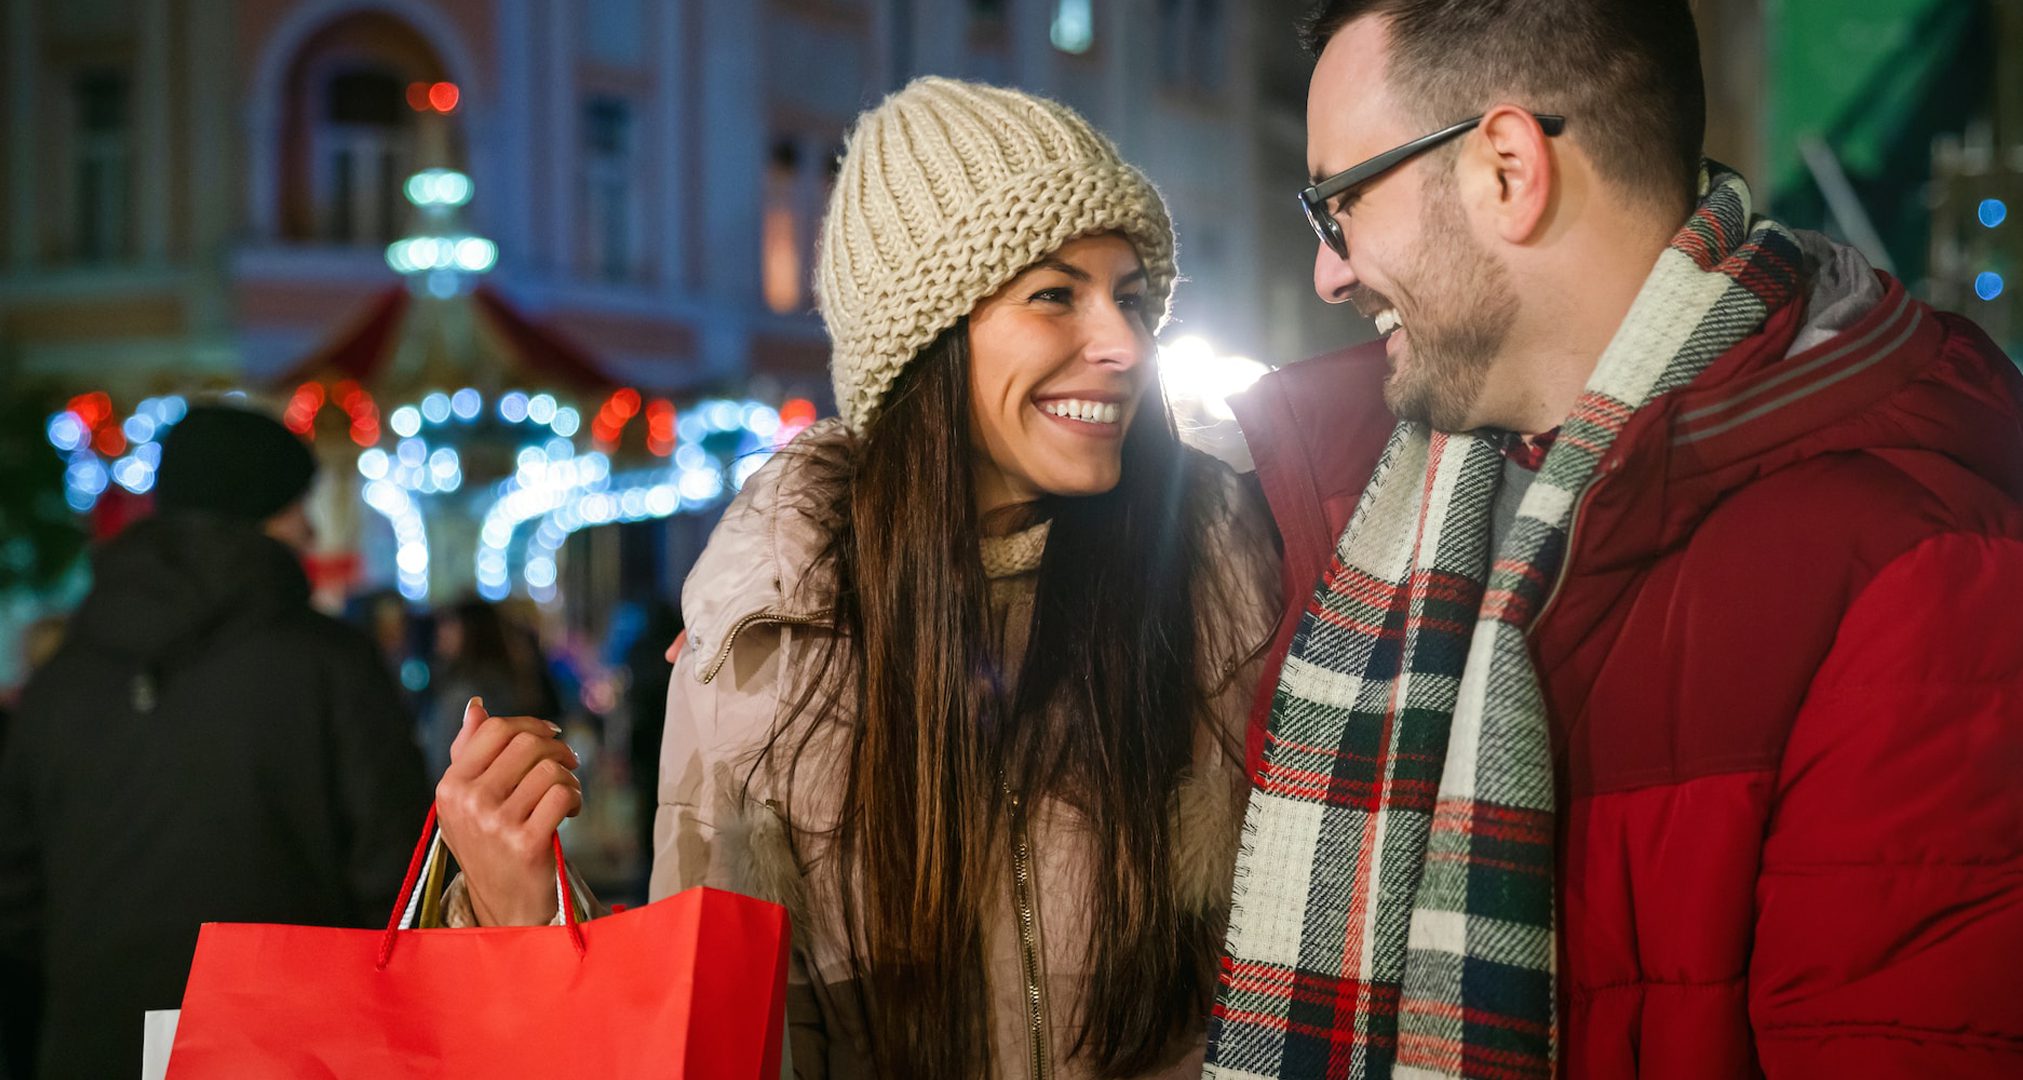 5 Strategy Tips for Your Holiday Marketing